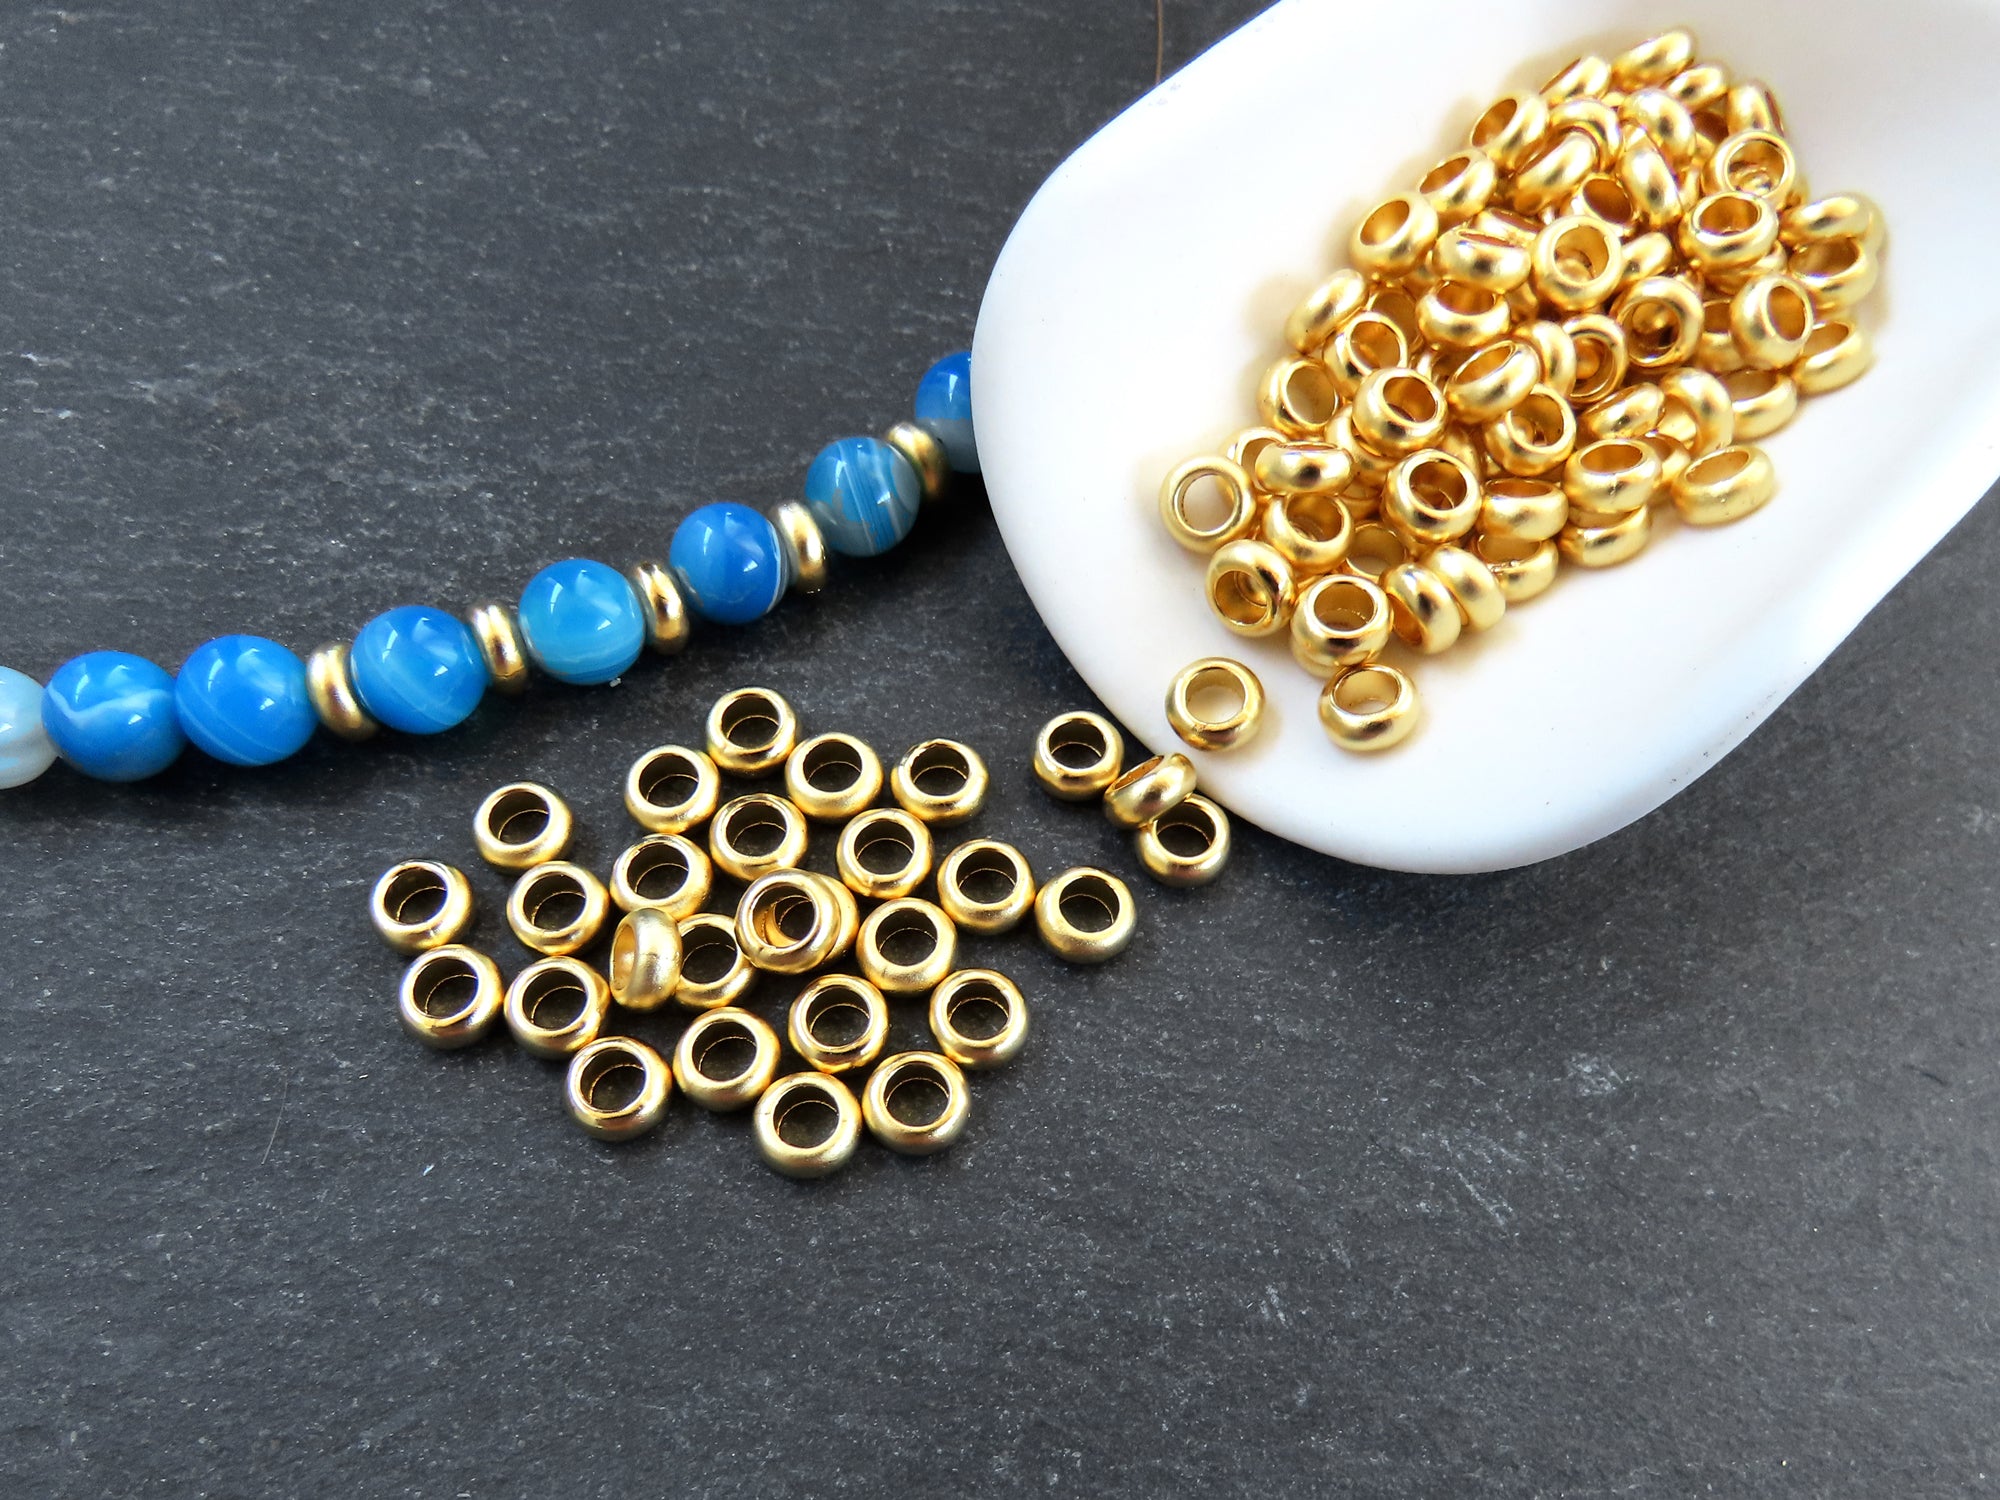 Small Bronze Washer Bead Spacers, Mykonos Greek Beads, Organic Round Metal  Beads, Jewelry Making Supply, Antique Bronze Plated, 20 Pc -  Finland